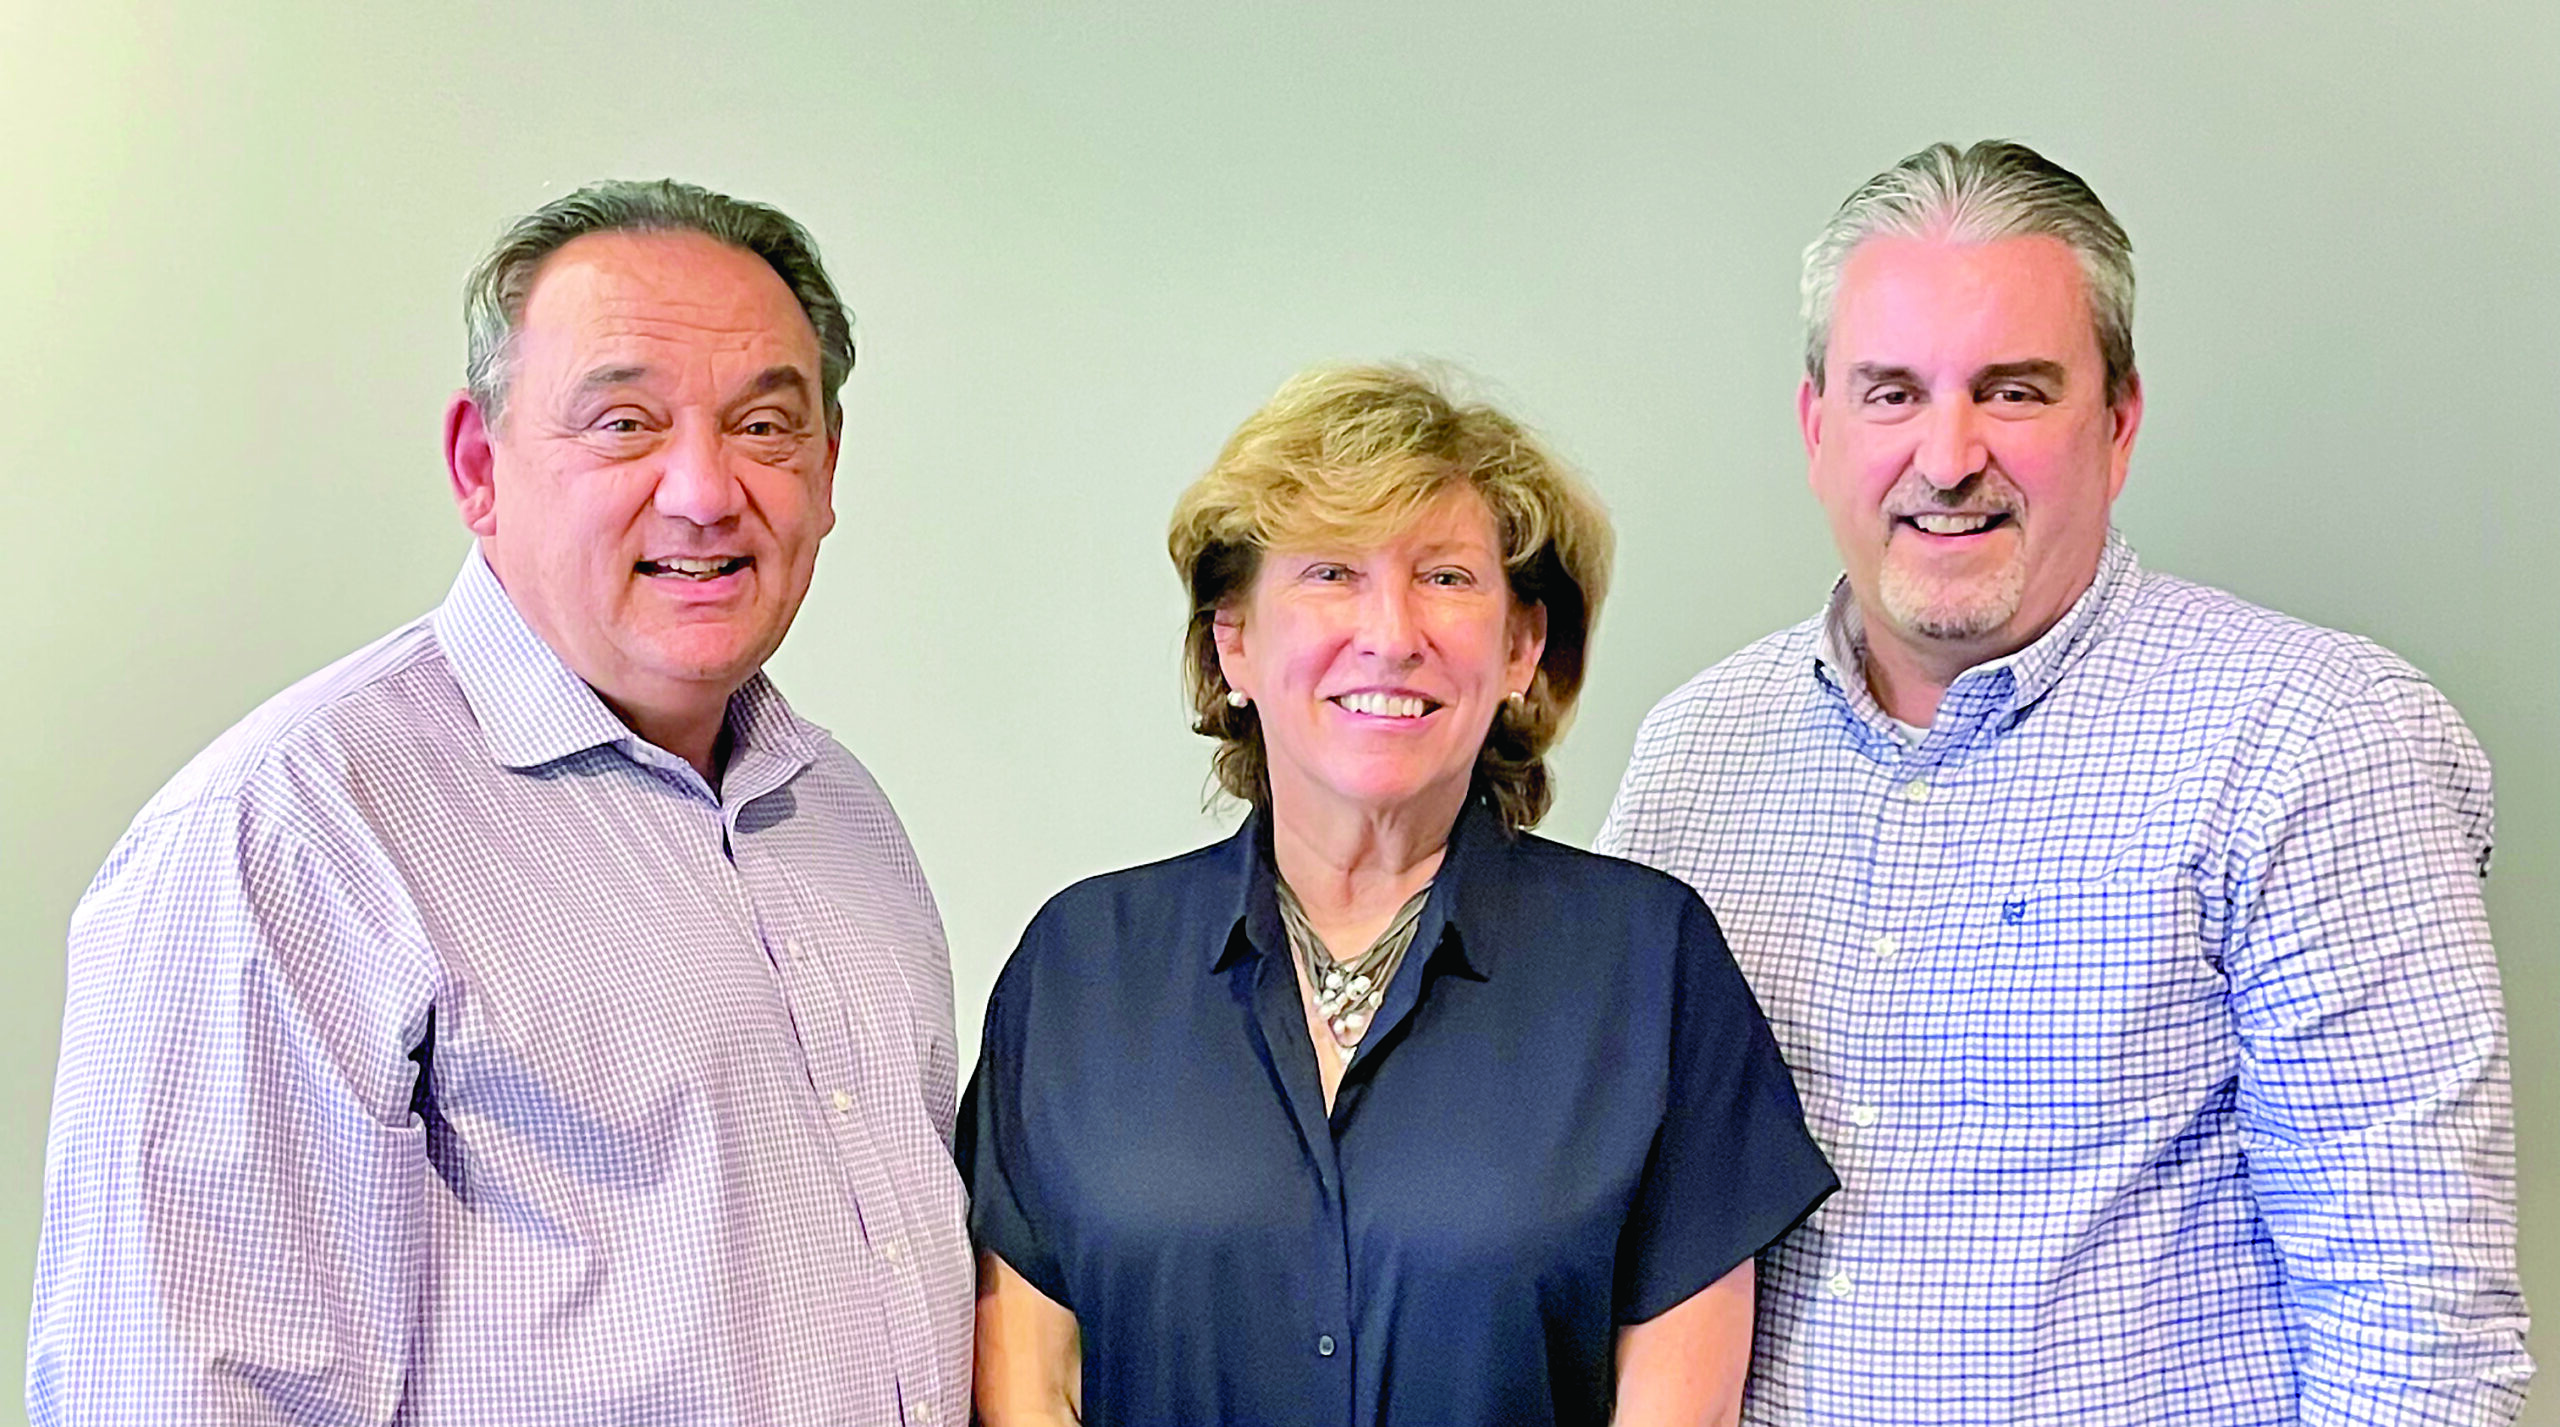 Business Profile: My House Partners’ trio of agents operates as ‘well-oiled machine’